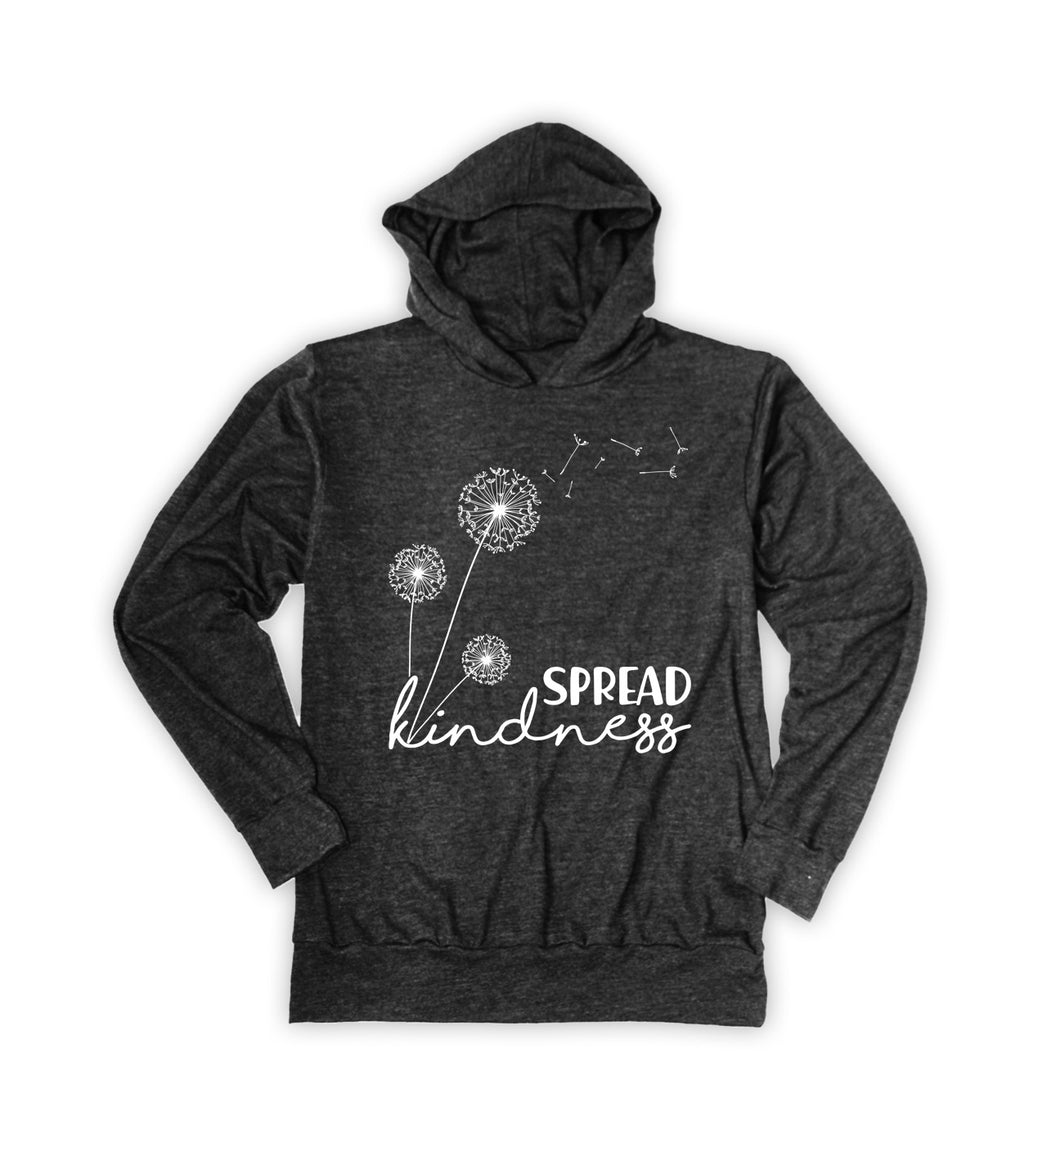 Spread kindness charcoal lightweight hoodie